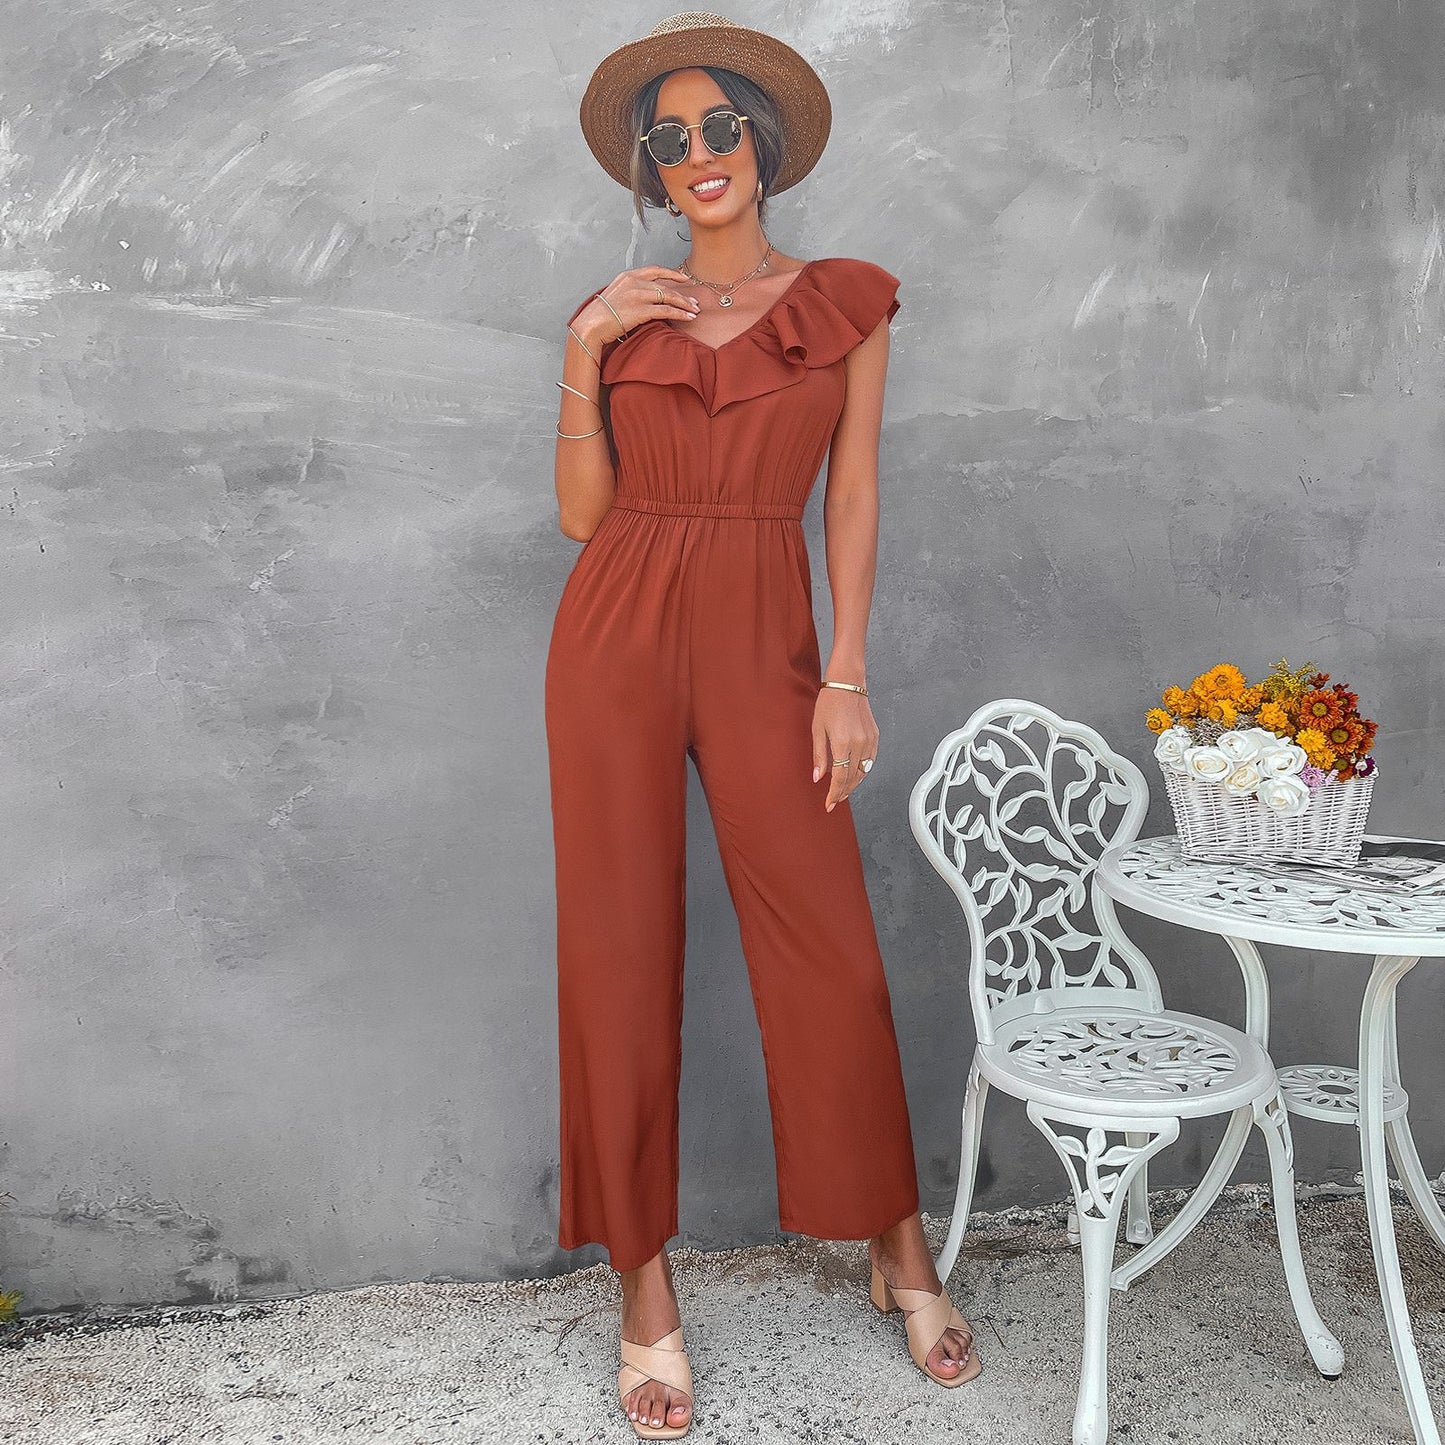 European And American Women's Solid Color Open Back Jumpsuit Summer Off Shoulder Casual Sundress Women Beachwear Jumpsuit Ruffle High Waist Jumpsuits Female Overalls Body Mujer.